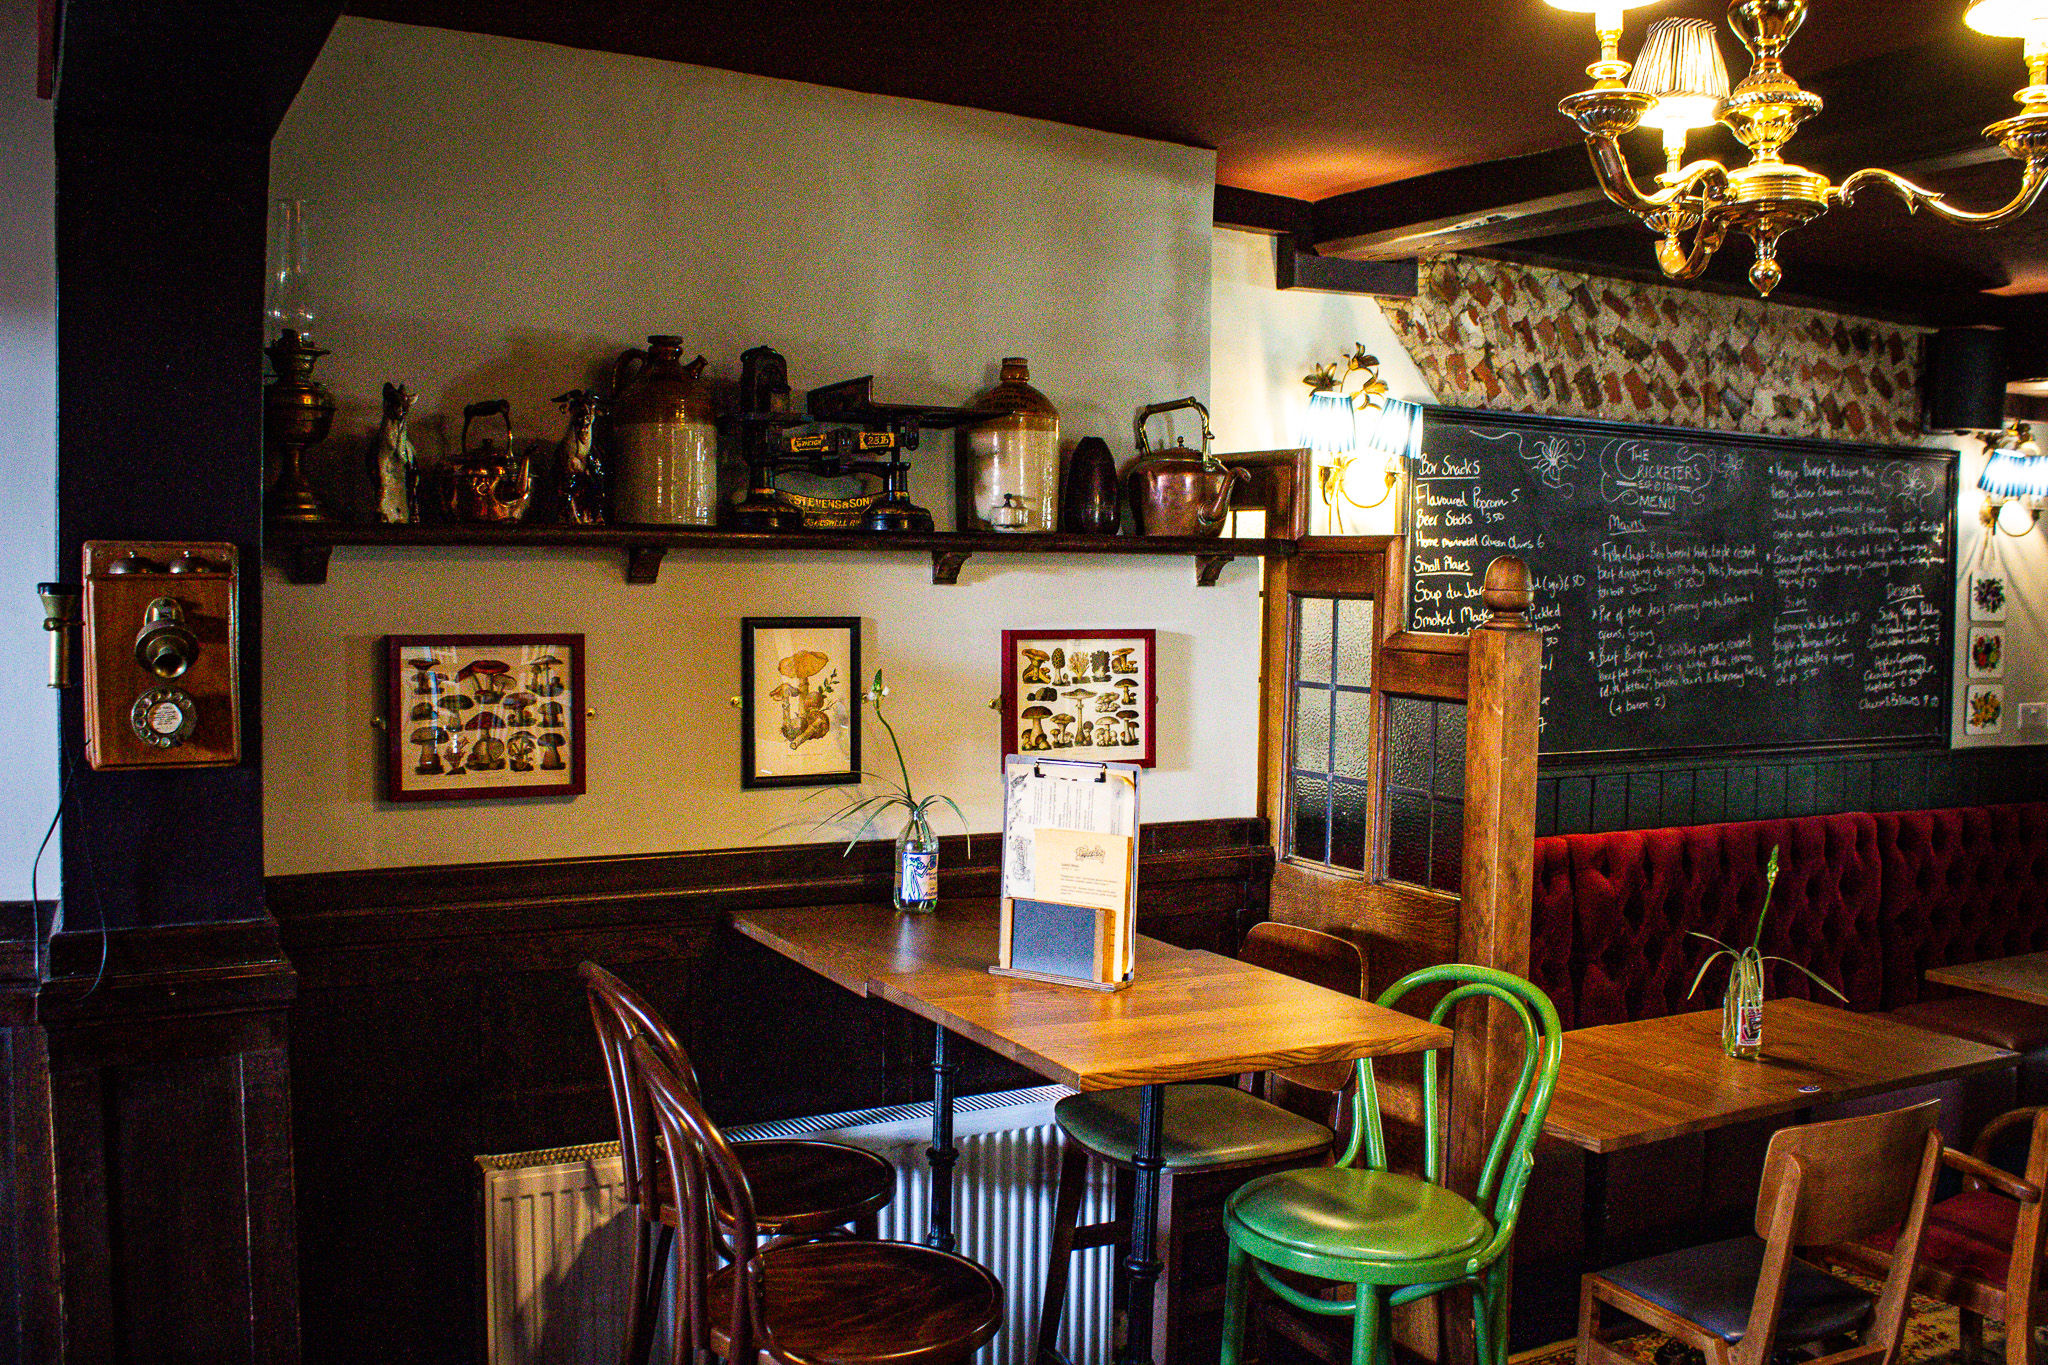 interior shot of the Cricketers Worthing pub in Sussex. Dim lights, brown wooden tables and chairs with decorations on the wall.